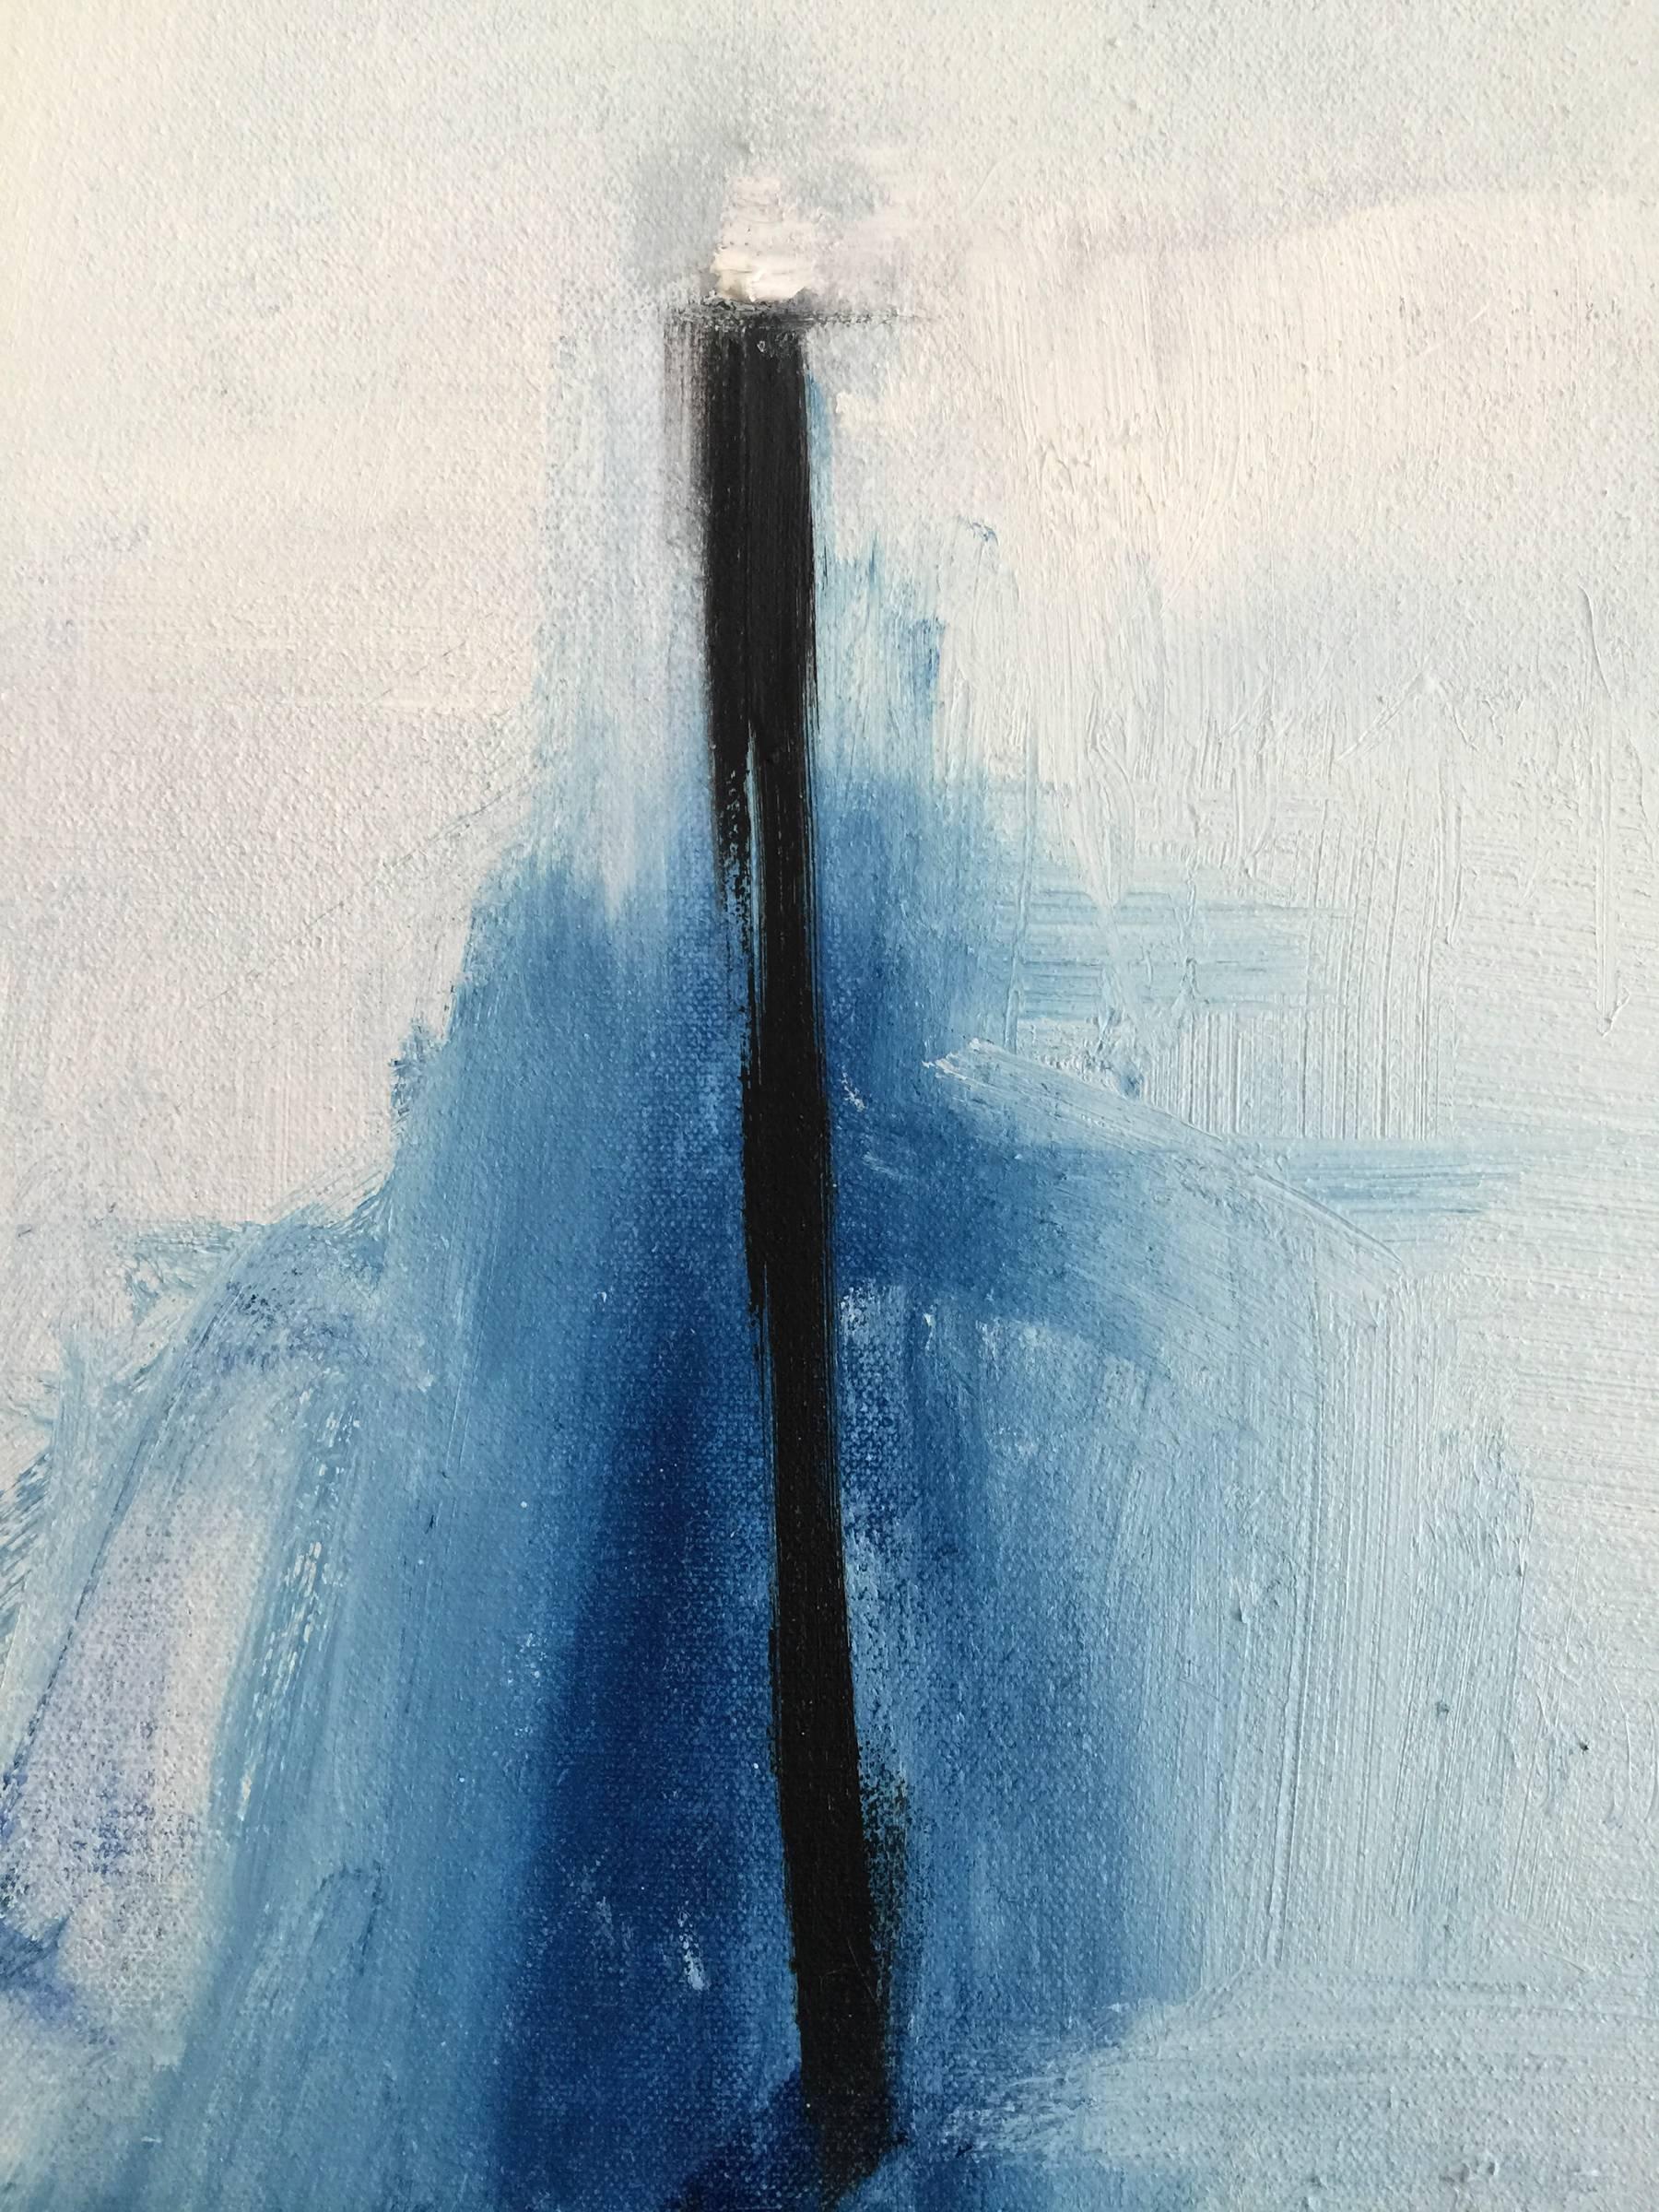 The Blue Motel Fading - Abstract Painting by Emilia Dubicki